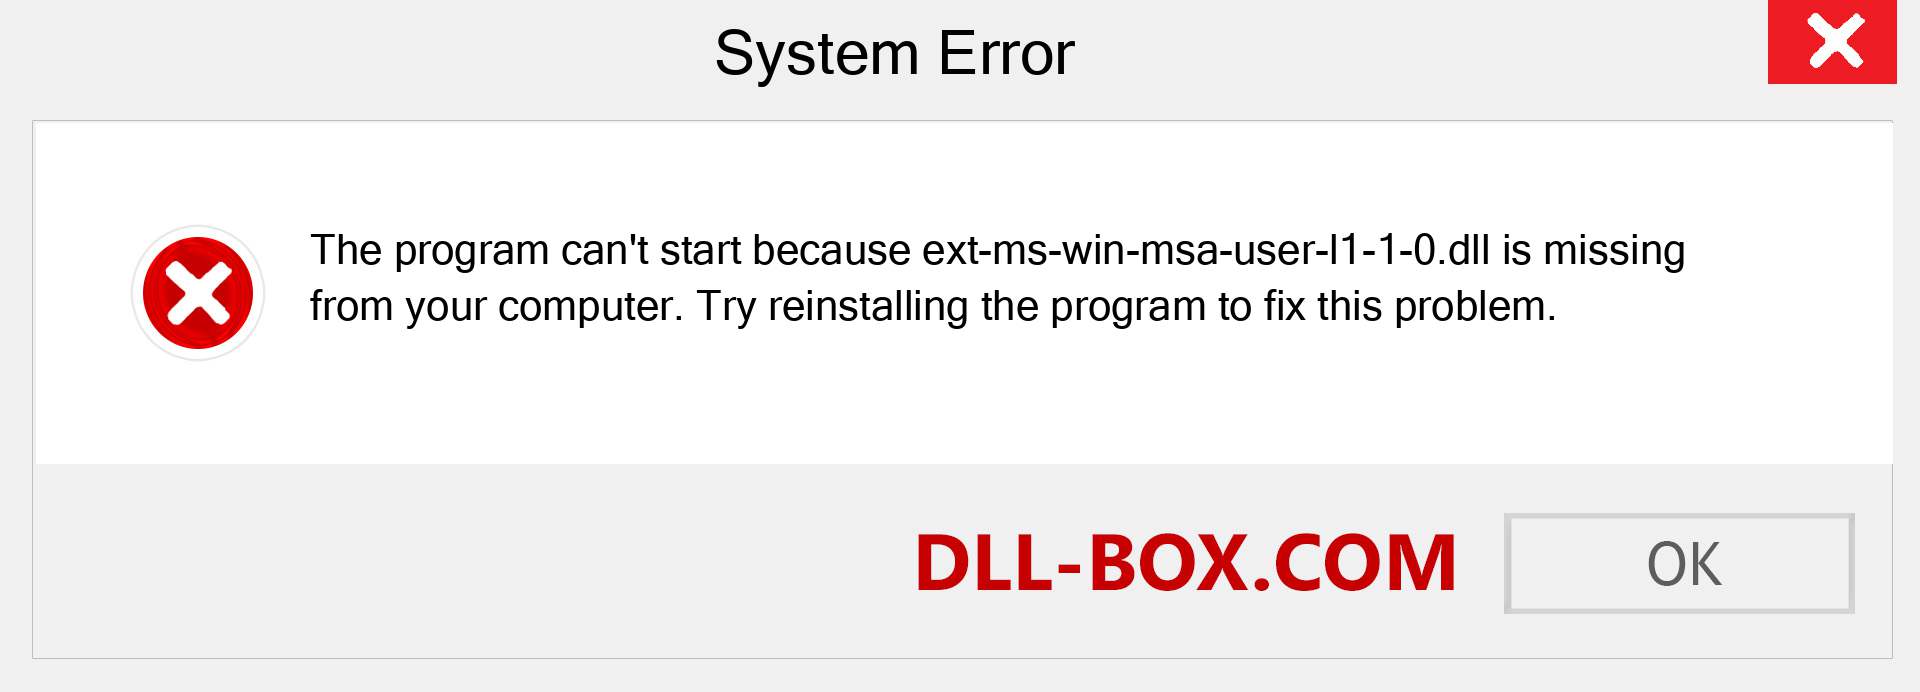  ext-ms-win-msa-user-l1-1-0.dll file is missing?. Download for Windows 7, 8, 10 - Fix  ext-ms-win-msa-user-l1-1-0 dll Missing Error on Windows, photos, images